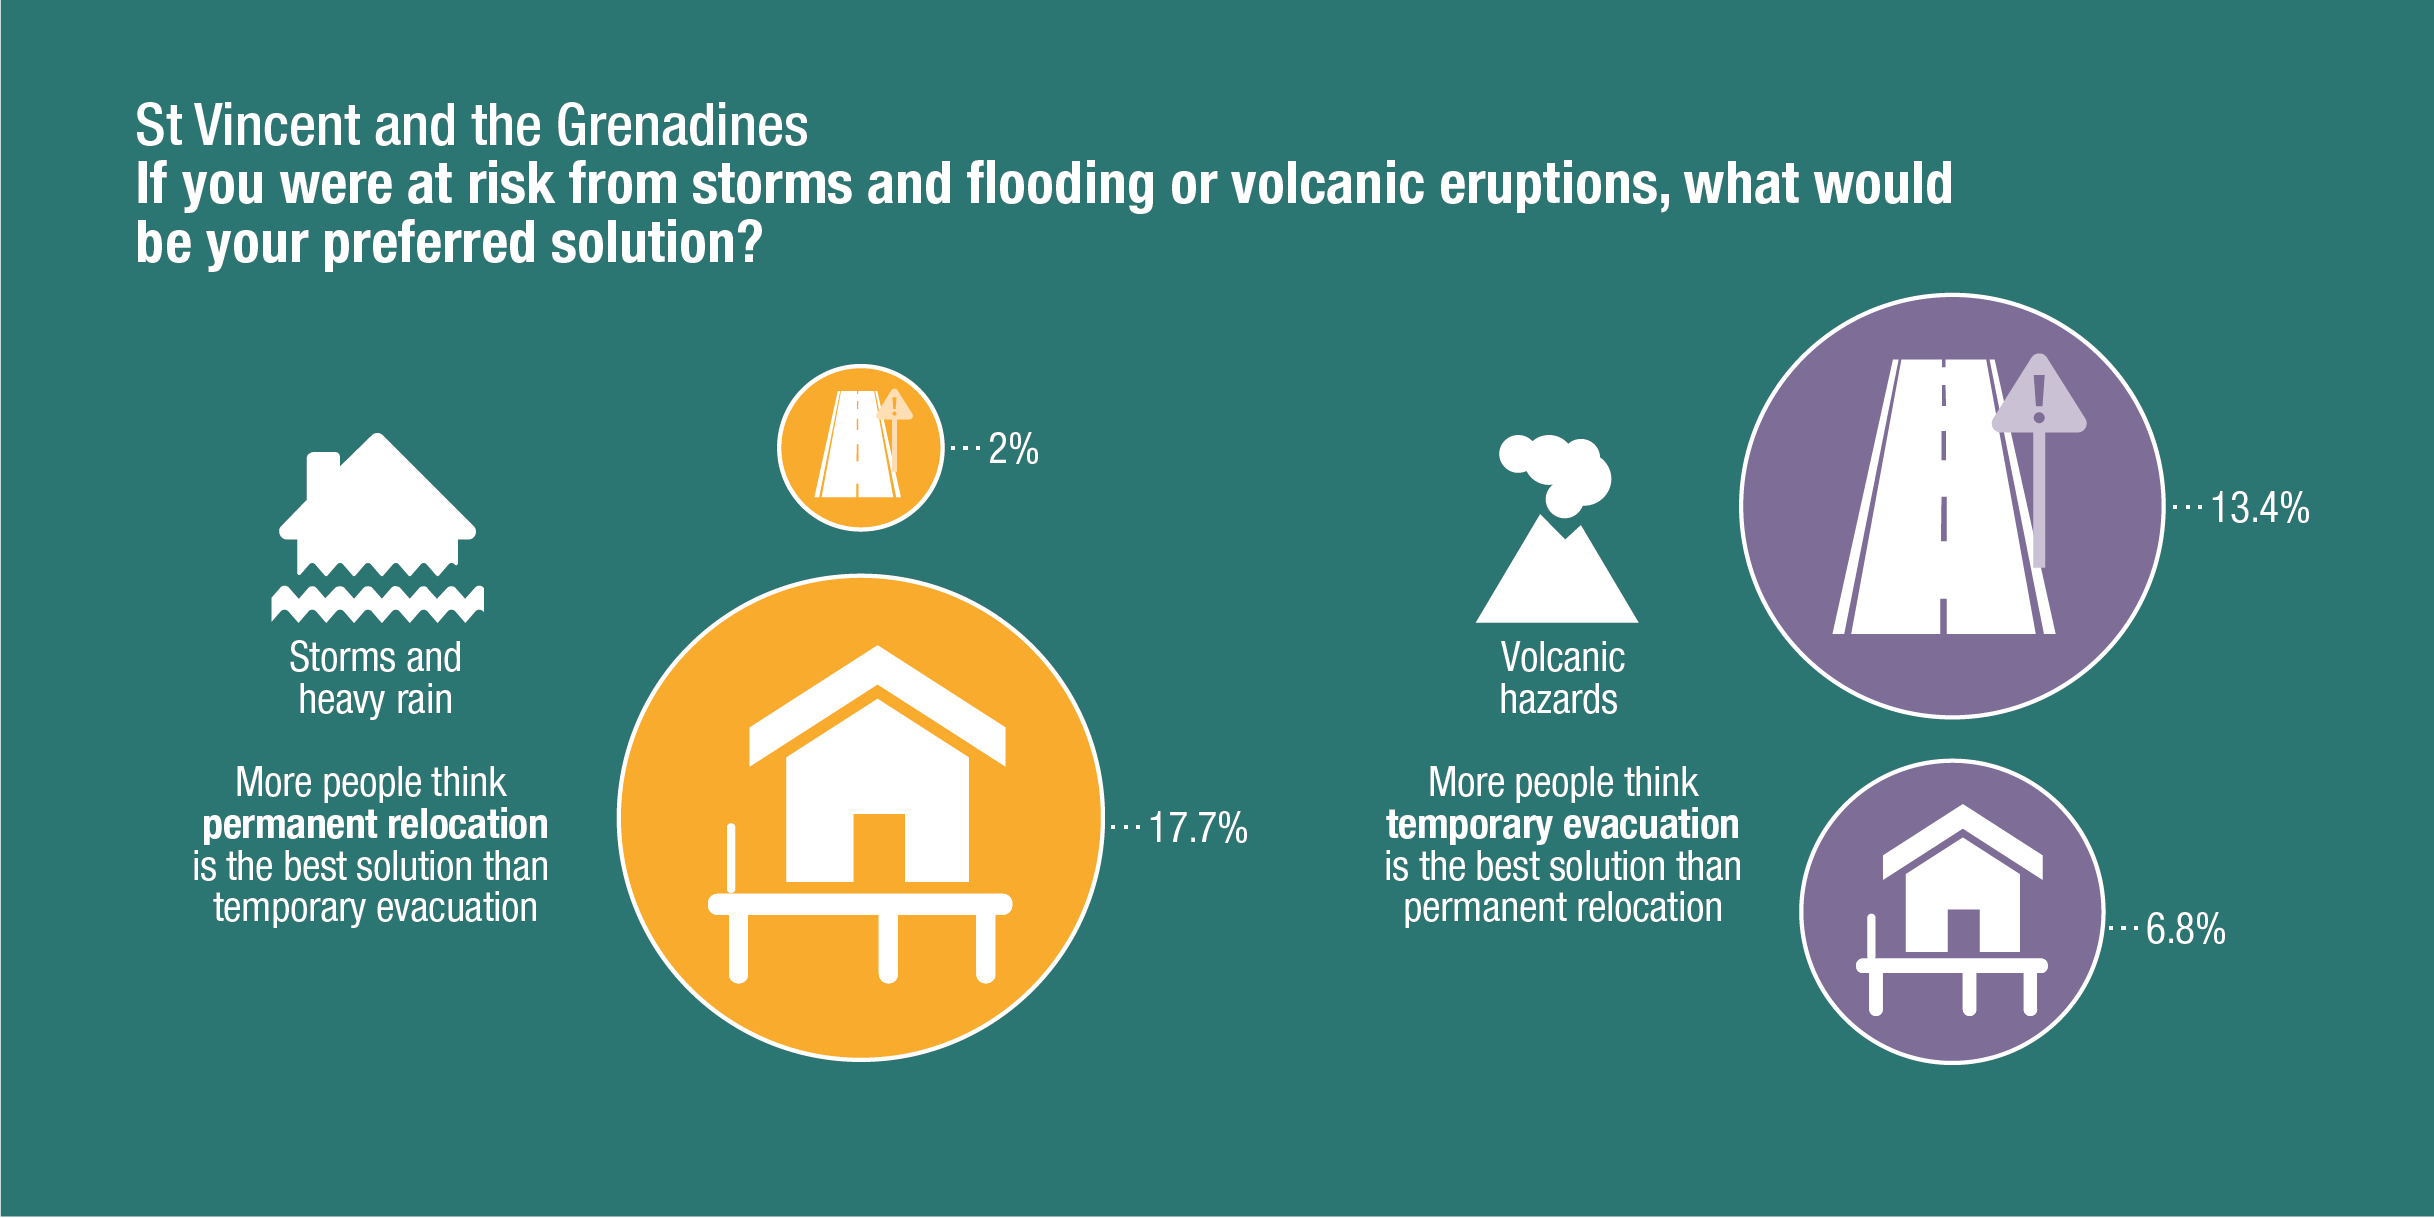 St Vincent and the Grenadines survey results: If you were at risk from storms and flooding or volcanic eruptions, what would be your preferred solution? ODI, 2016. CC-BY-NC 4.0.